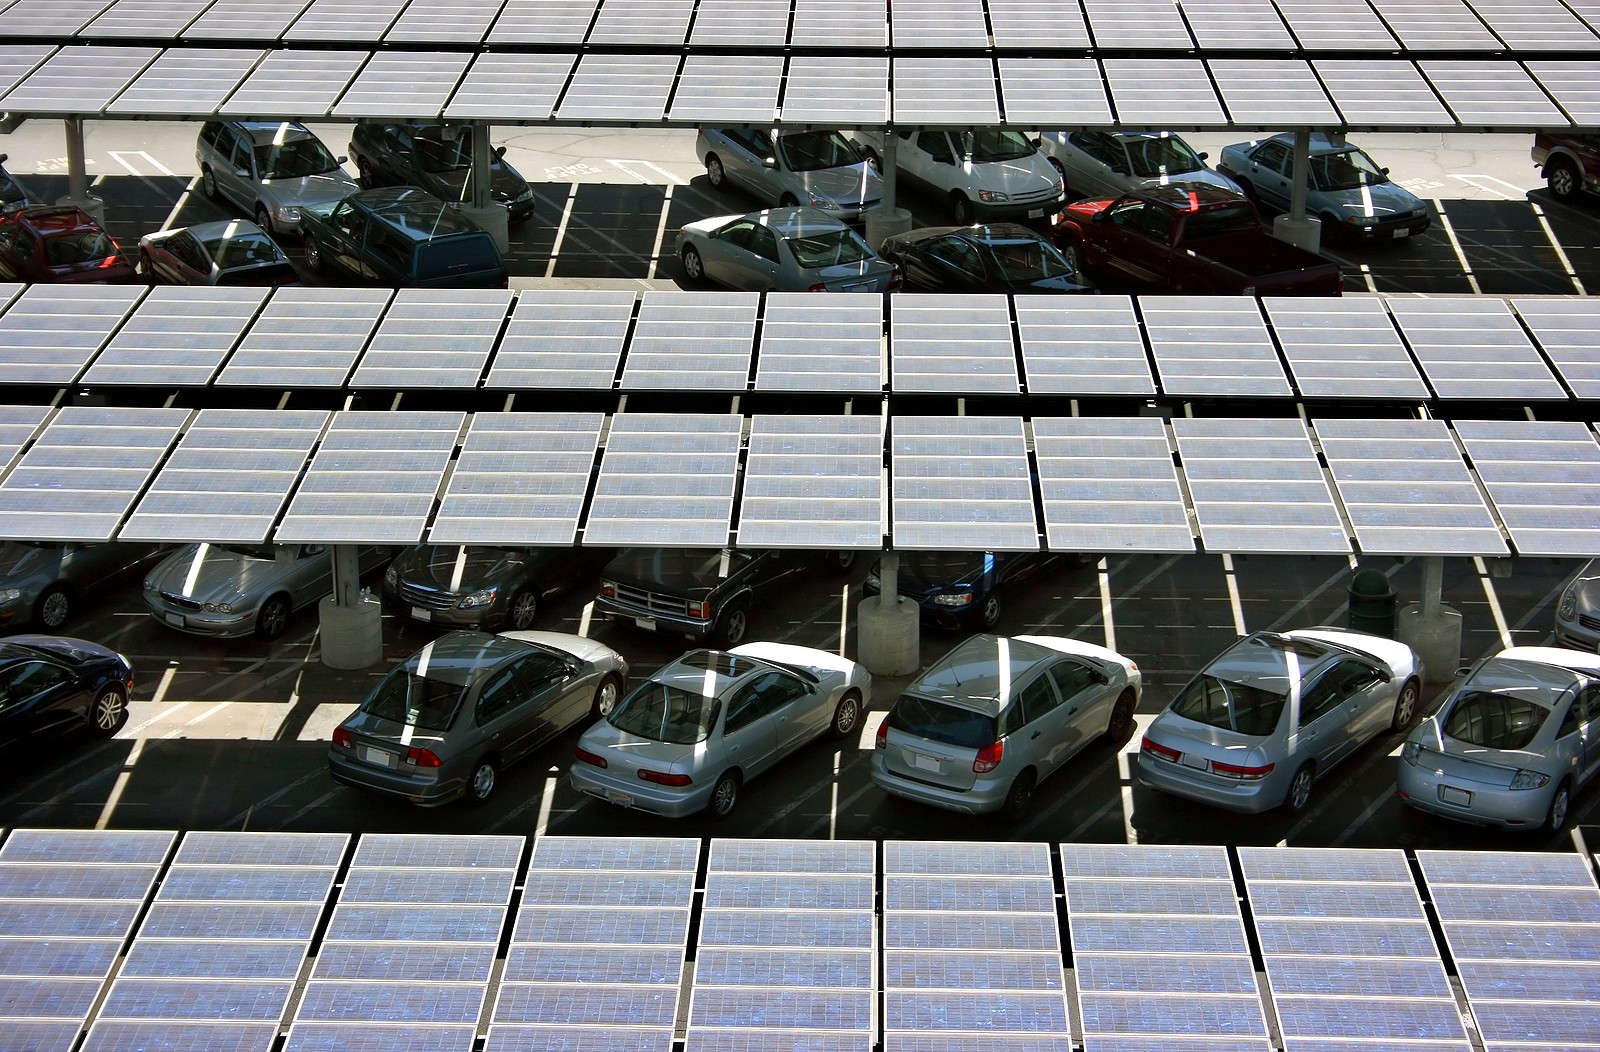 Solar energy carport in California with rows of cars parked underneath.